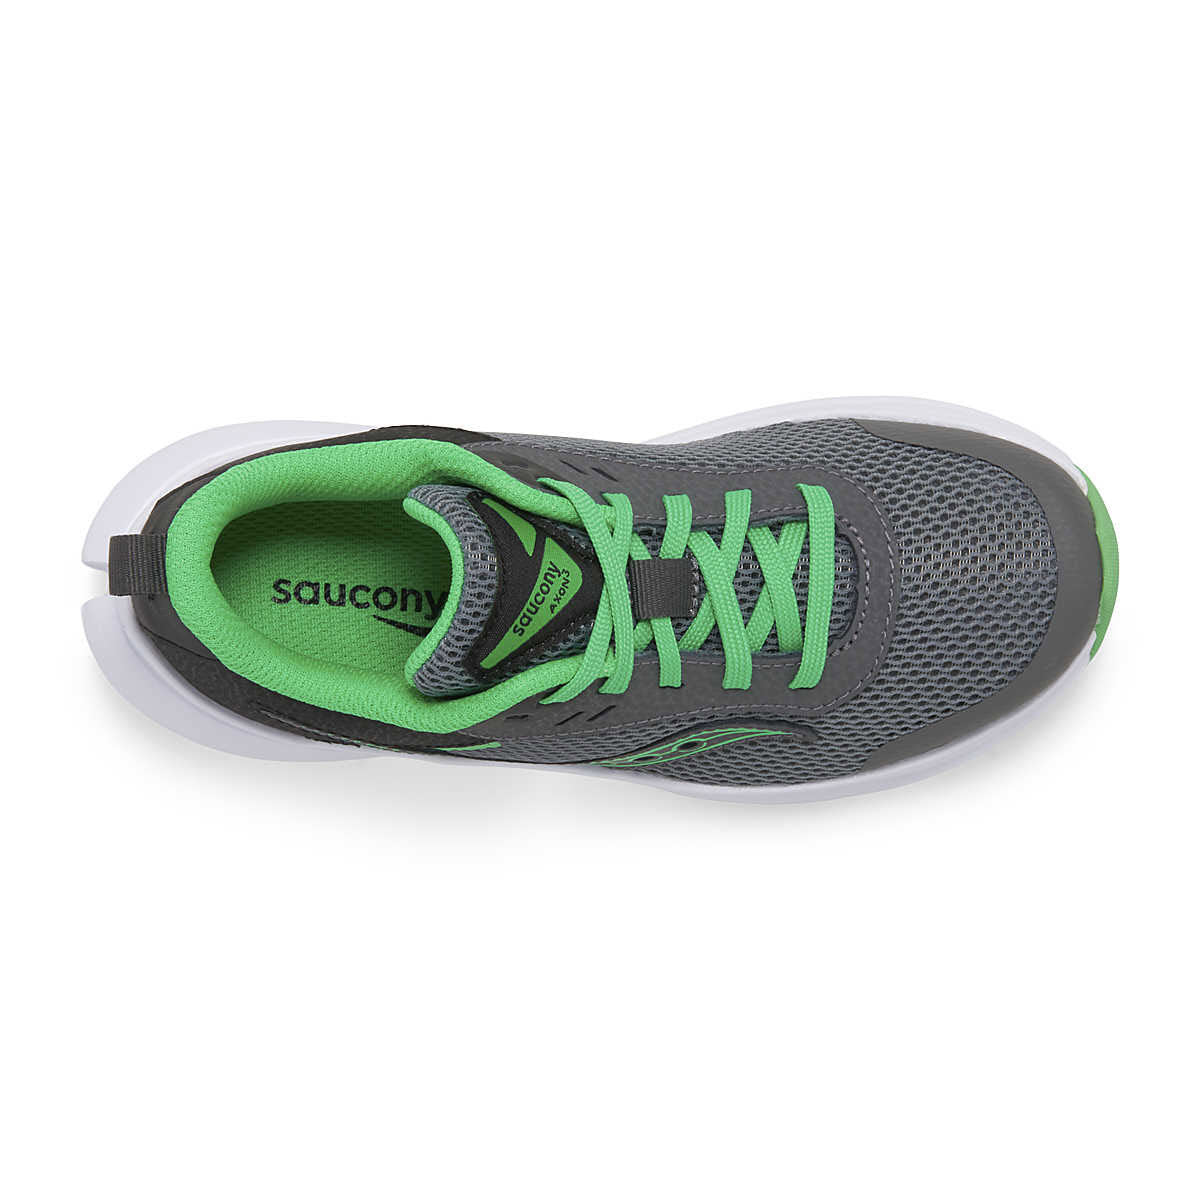 Top view of a gray and green Saucony Kids Axon 3 running shoe with lace-up closure, showing the Saucony brand name on the insole.